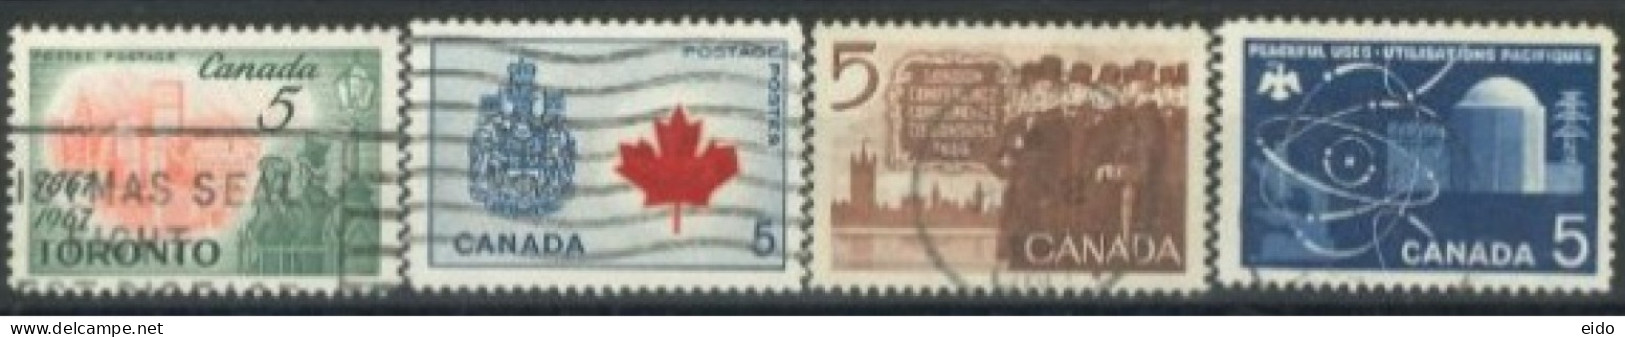 CANADA - 1964/67, STAMPS SET OF 4, USED. - Usati